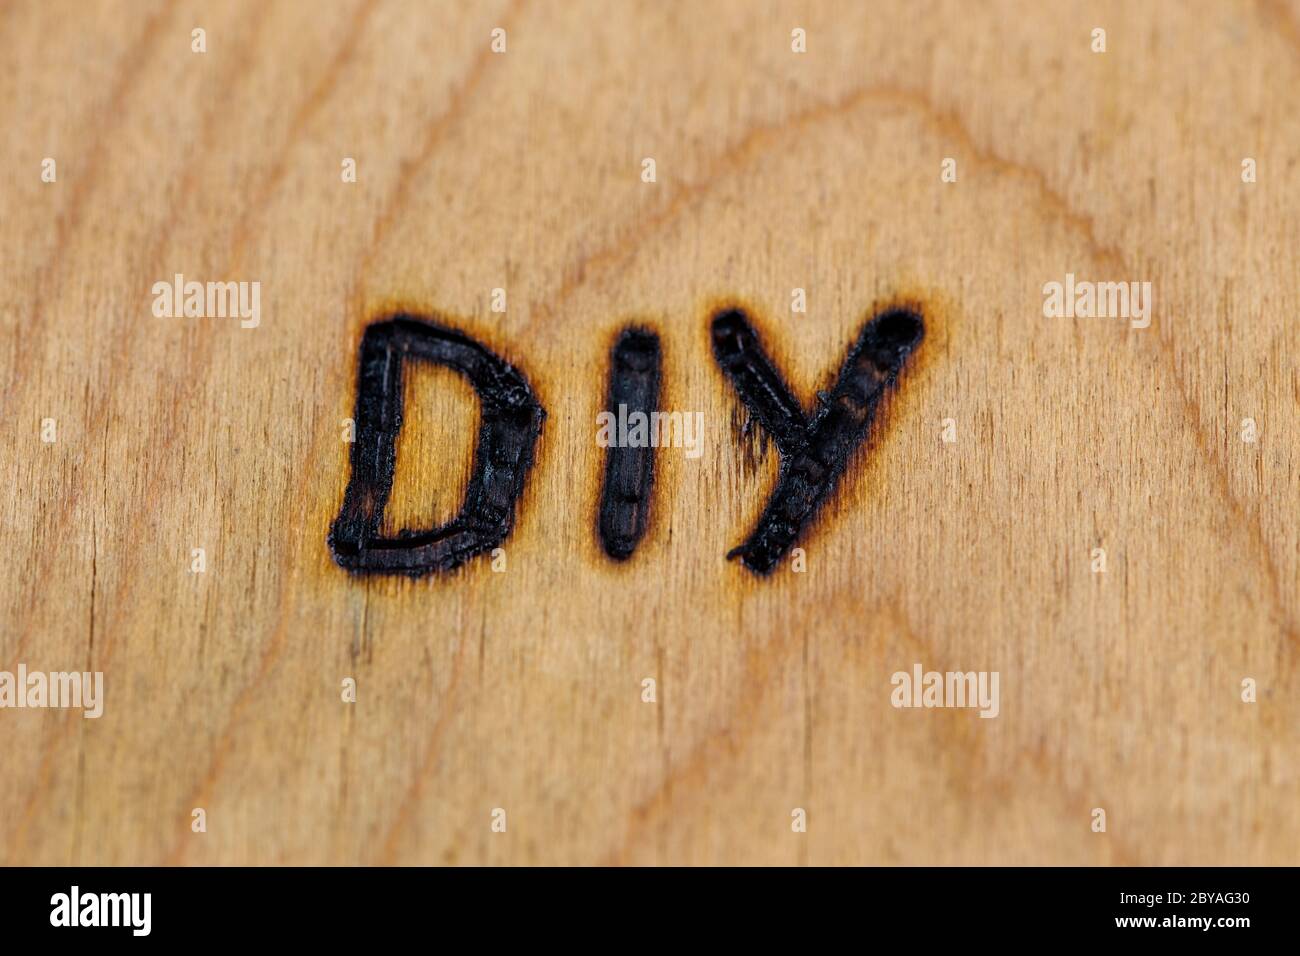 an abbreviation DIY - do it yourself - burned by hand with electrical woodburner on plywood surface Stock Photo